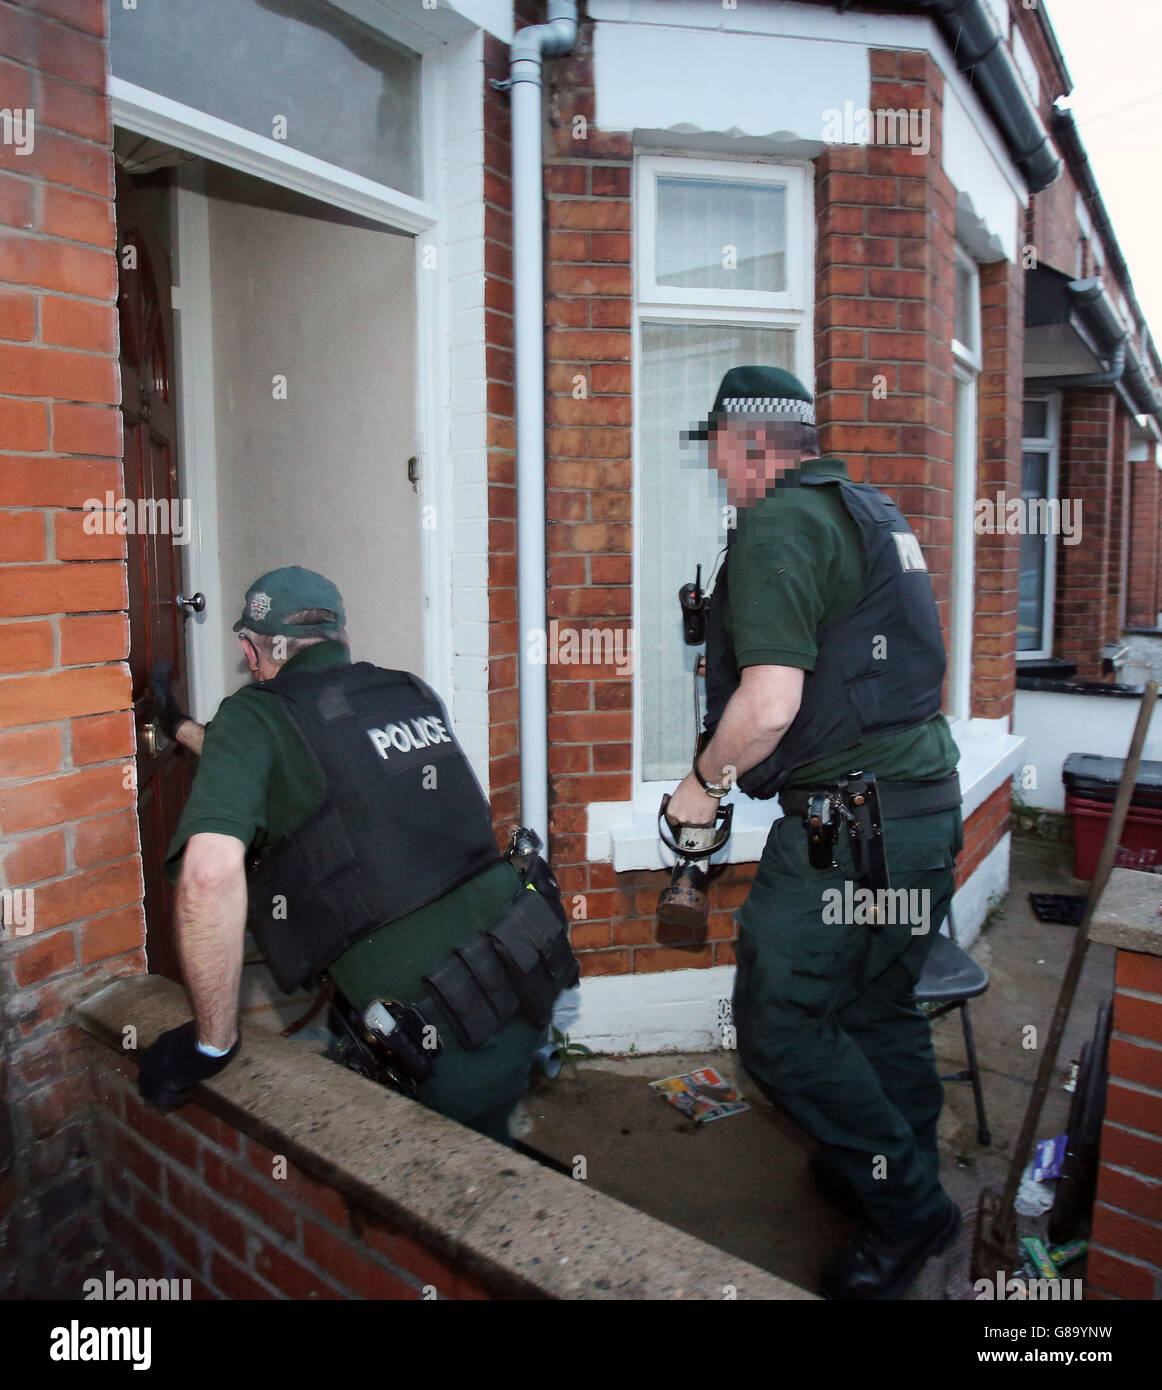 PSNI officers carry out a drugs raid on a house in East Belfast as part of Operation Torus, an initiative to tackle street level drug dealing. Stock Photo